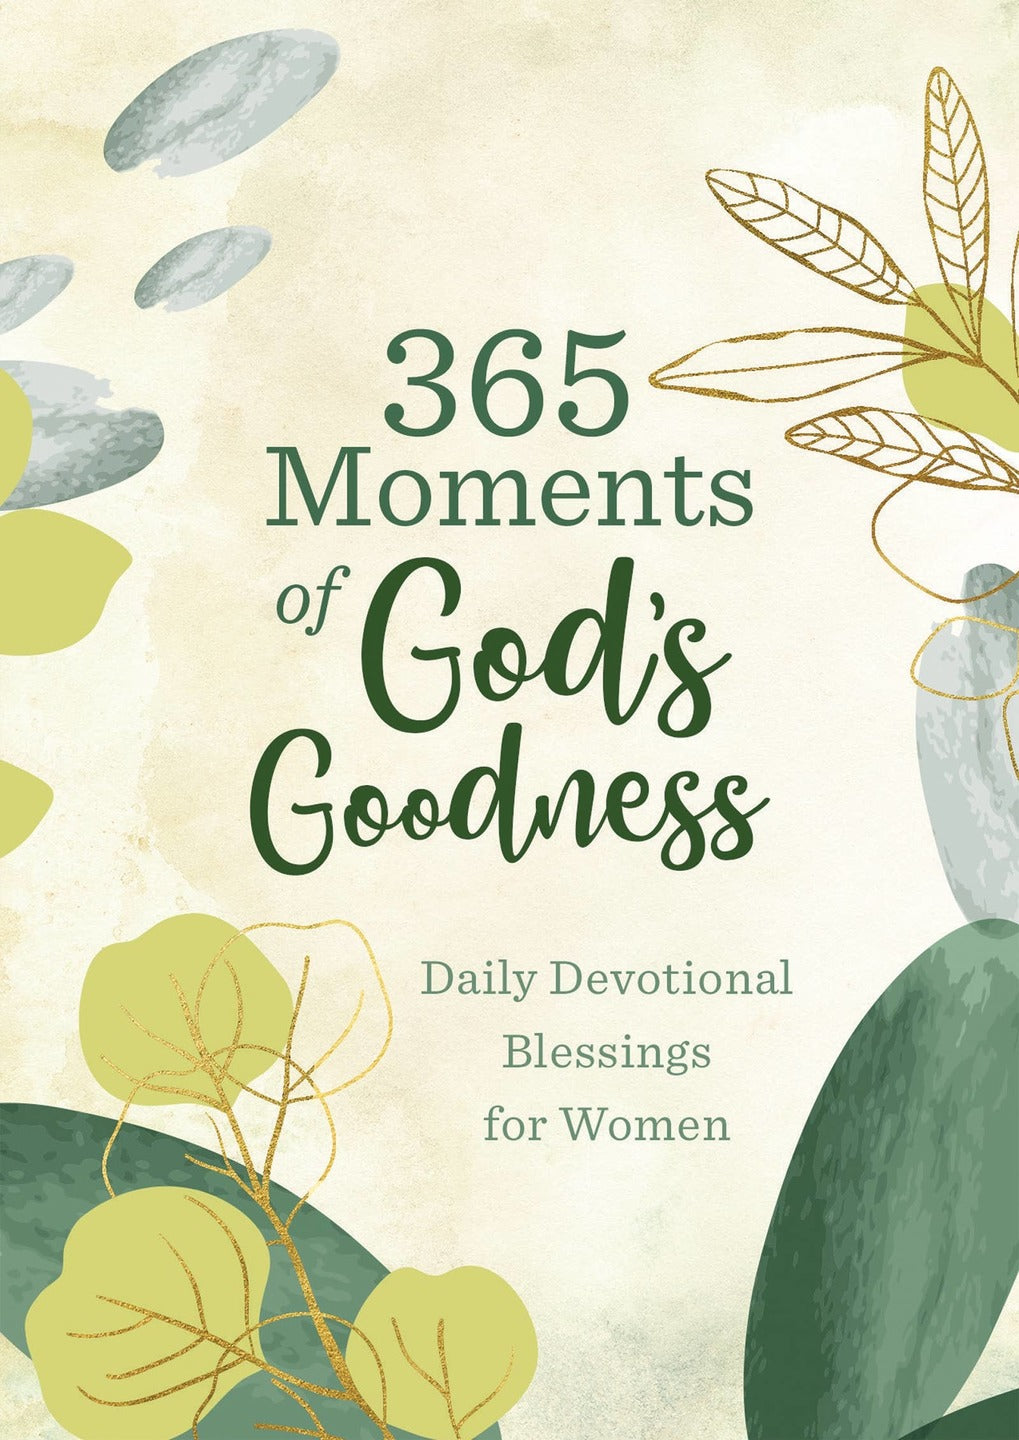 Barbour Publishing, Inc. - 365 Moments of God's Goodness